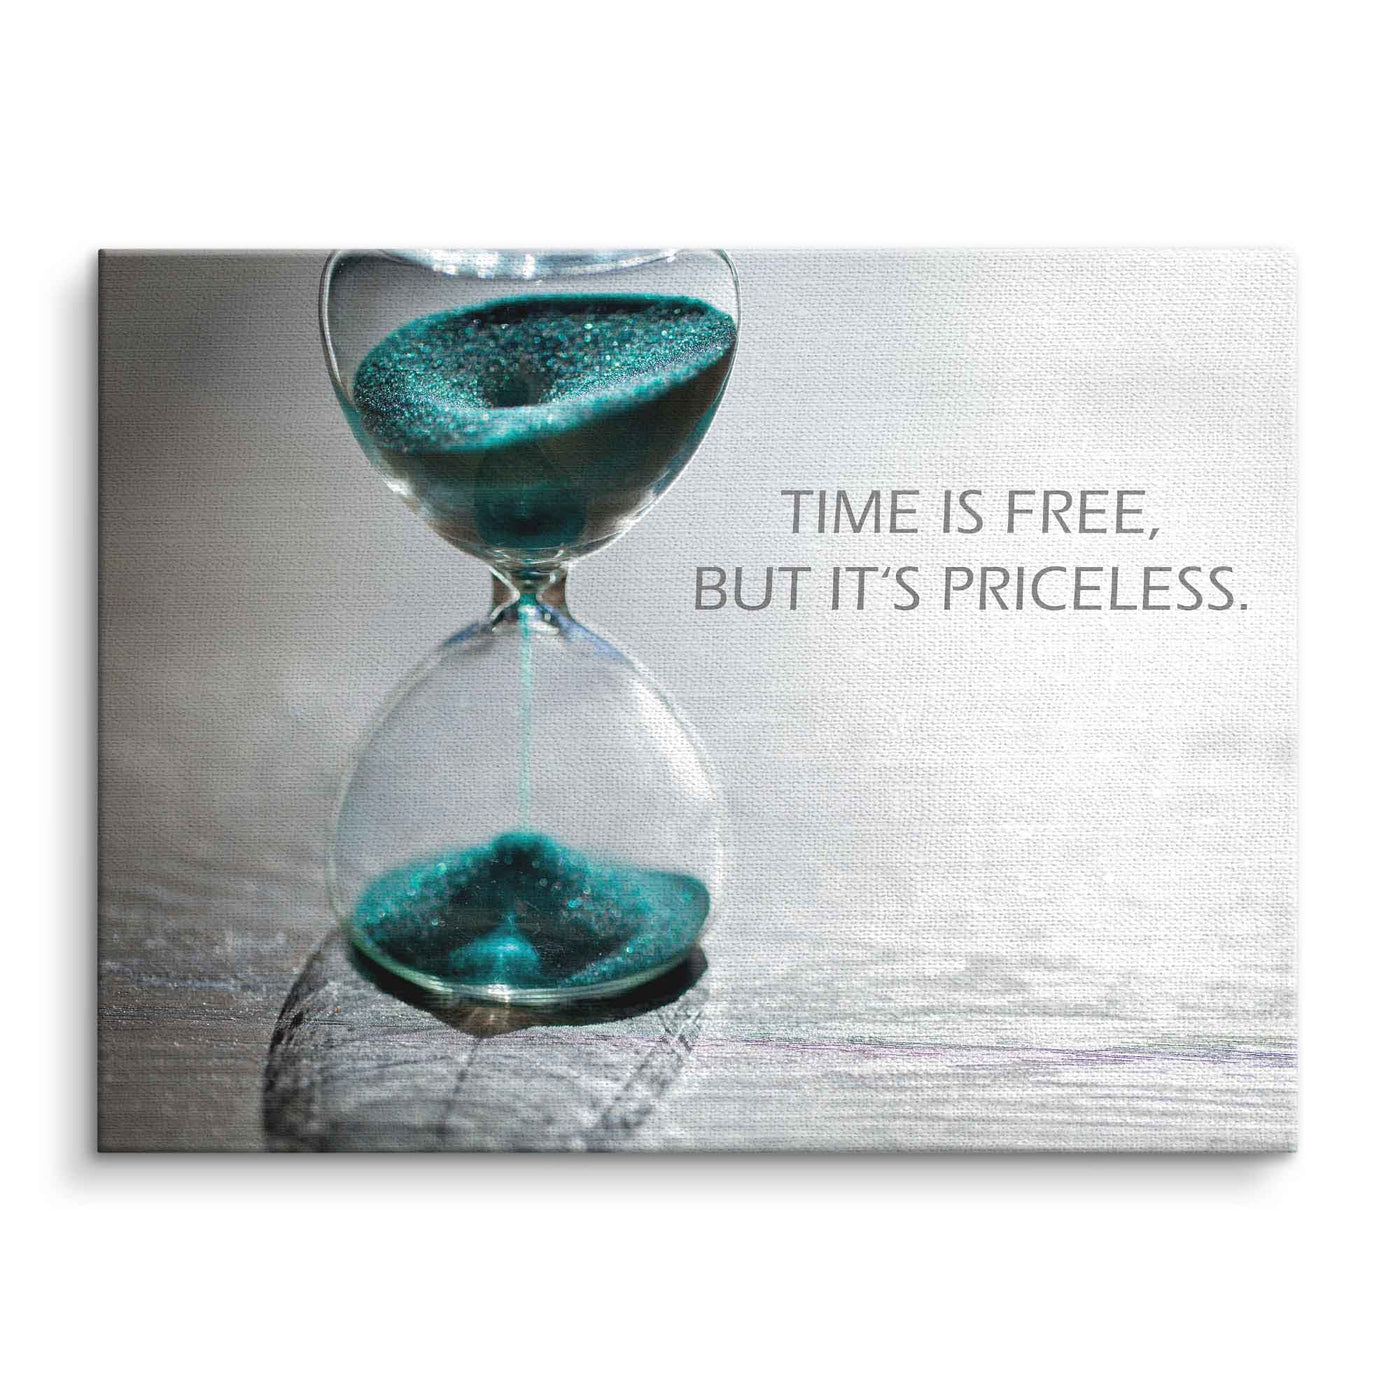 Time is free, but priceless